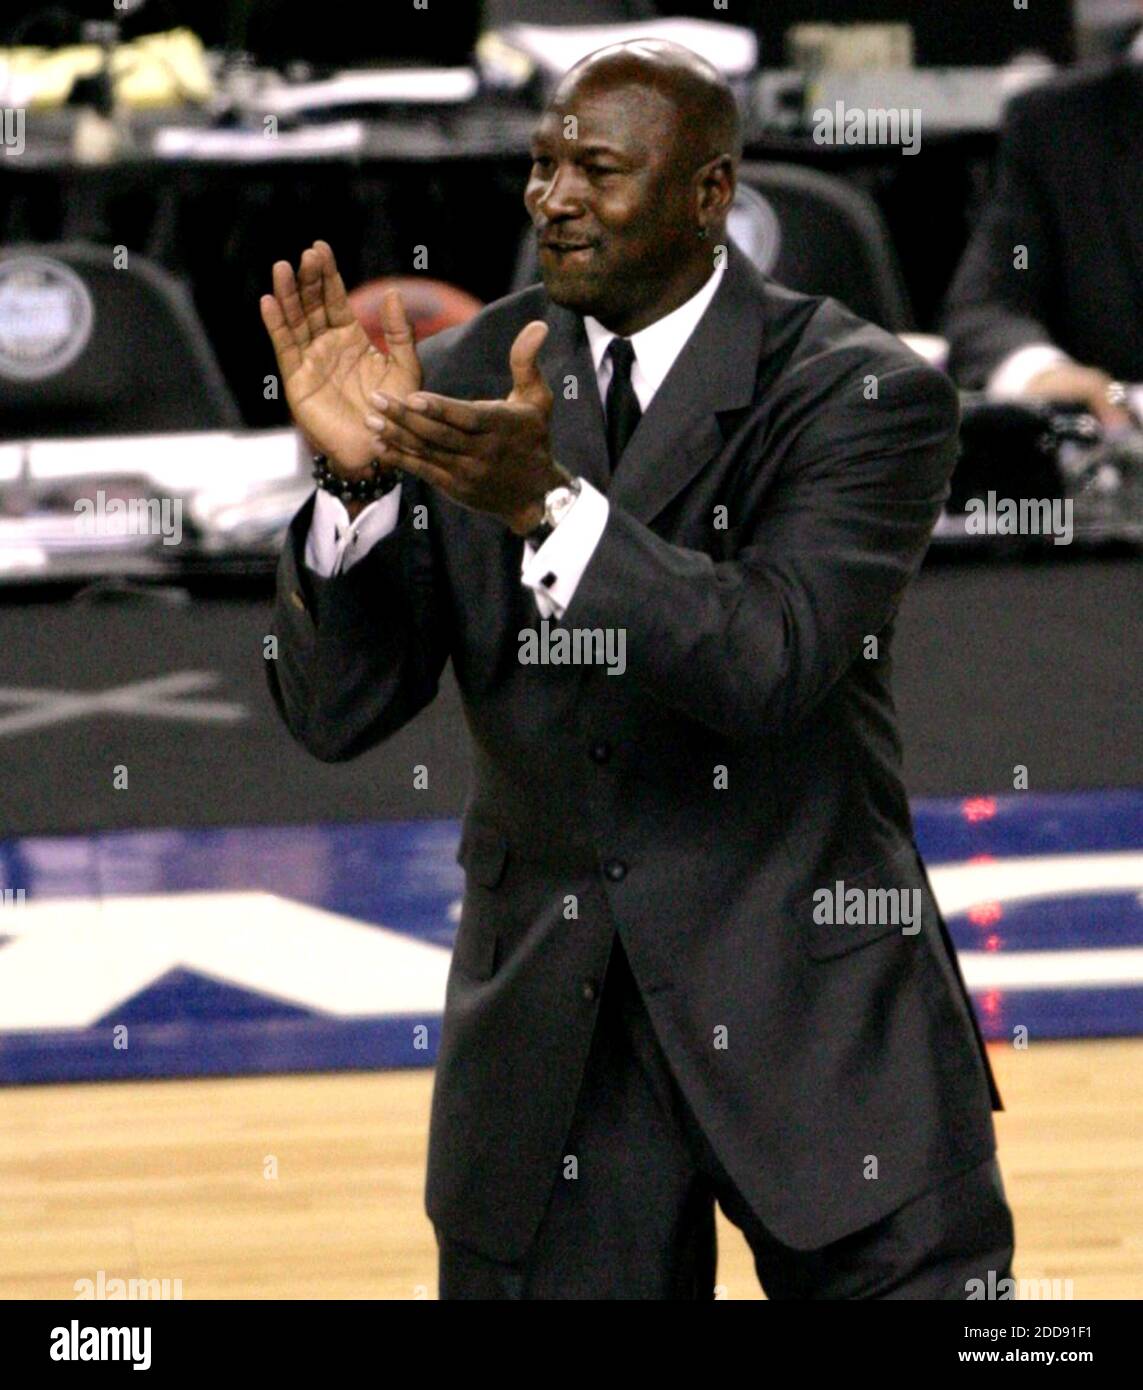 NO FILM, NO VIDEO, NO TV, NO DOCUMENTARY - Michael Jordan was elected to the 2009 class of Basketball Hall of Fame during the men's NCAA Final Four championship game between Michigan State and University of North Carolina at Ford Field in Detroit, MI, USA on April 6, 2009. UNC defeated Michigan State, 89-72. Photo by Robert Willett/Raleigh News & Observer/MCT/Cameleon/ABACAPRESS.COM Stock Photo